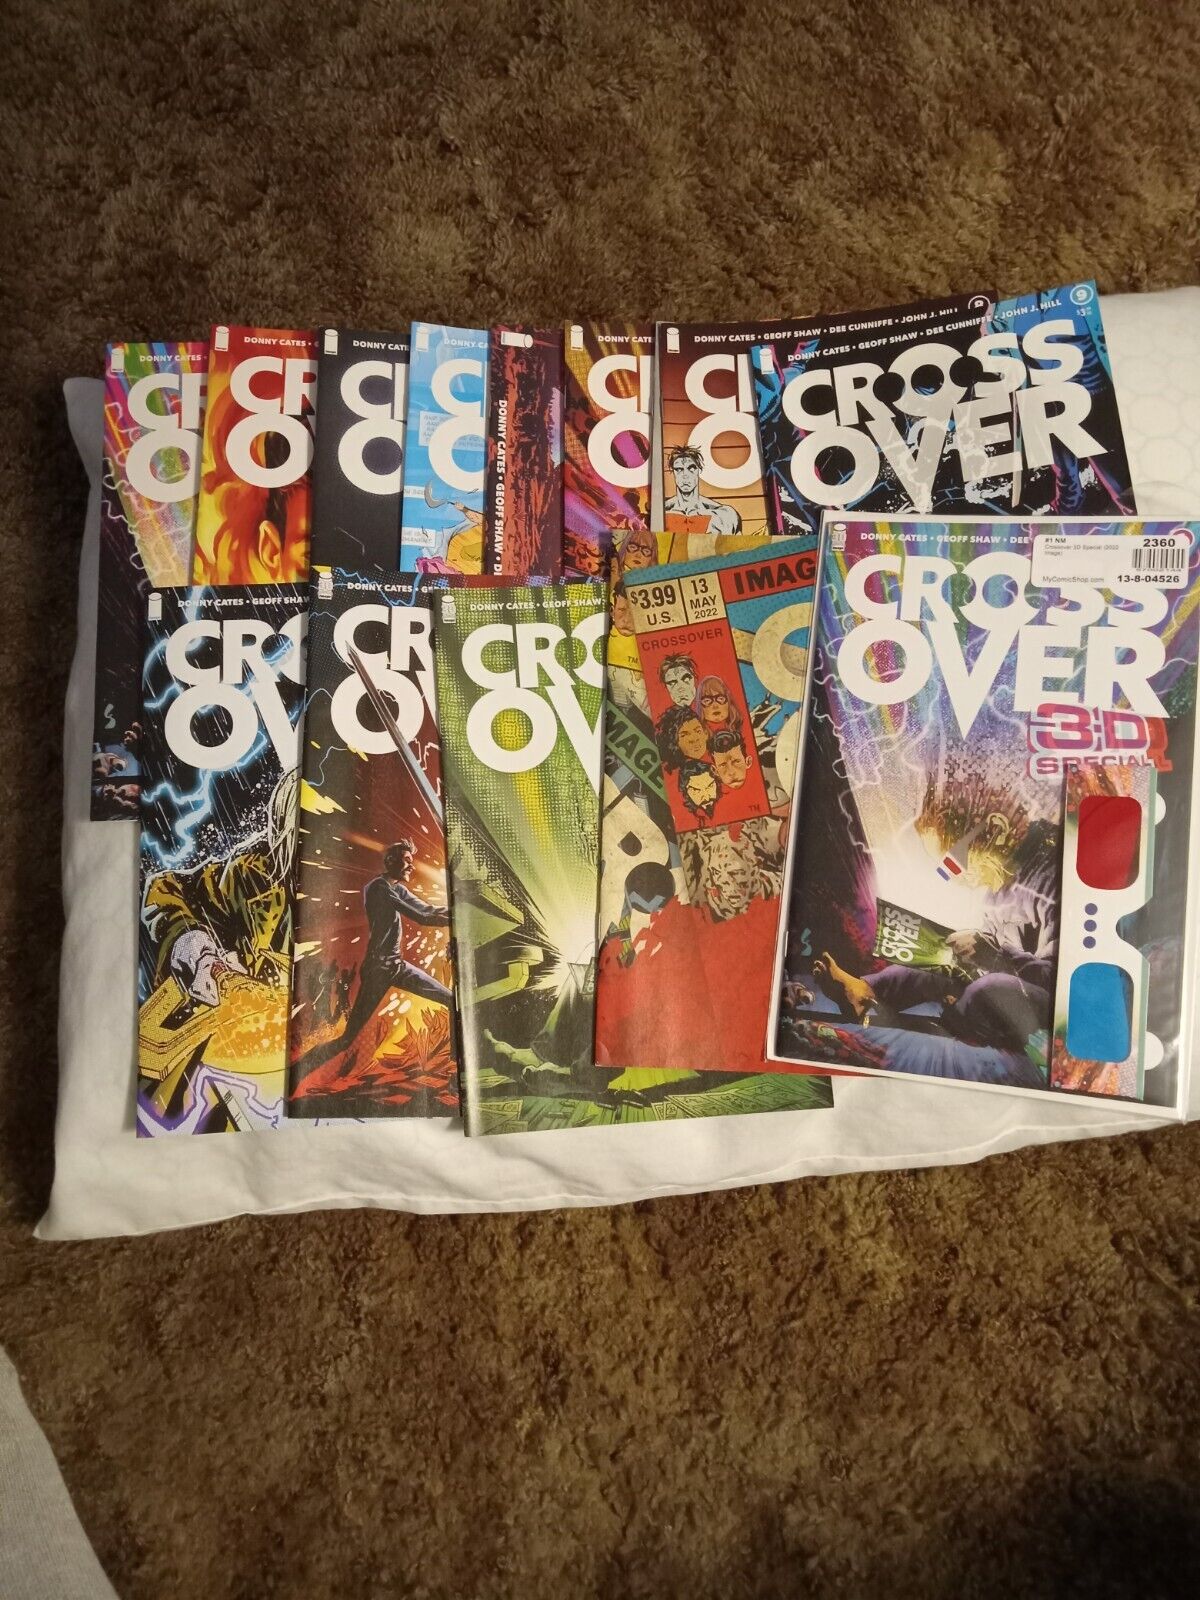 Crossover #1-13 + 3-D Special (Complete Image 2020 Series)  